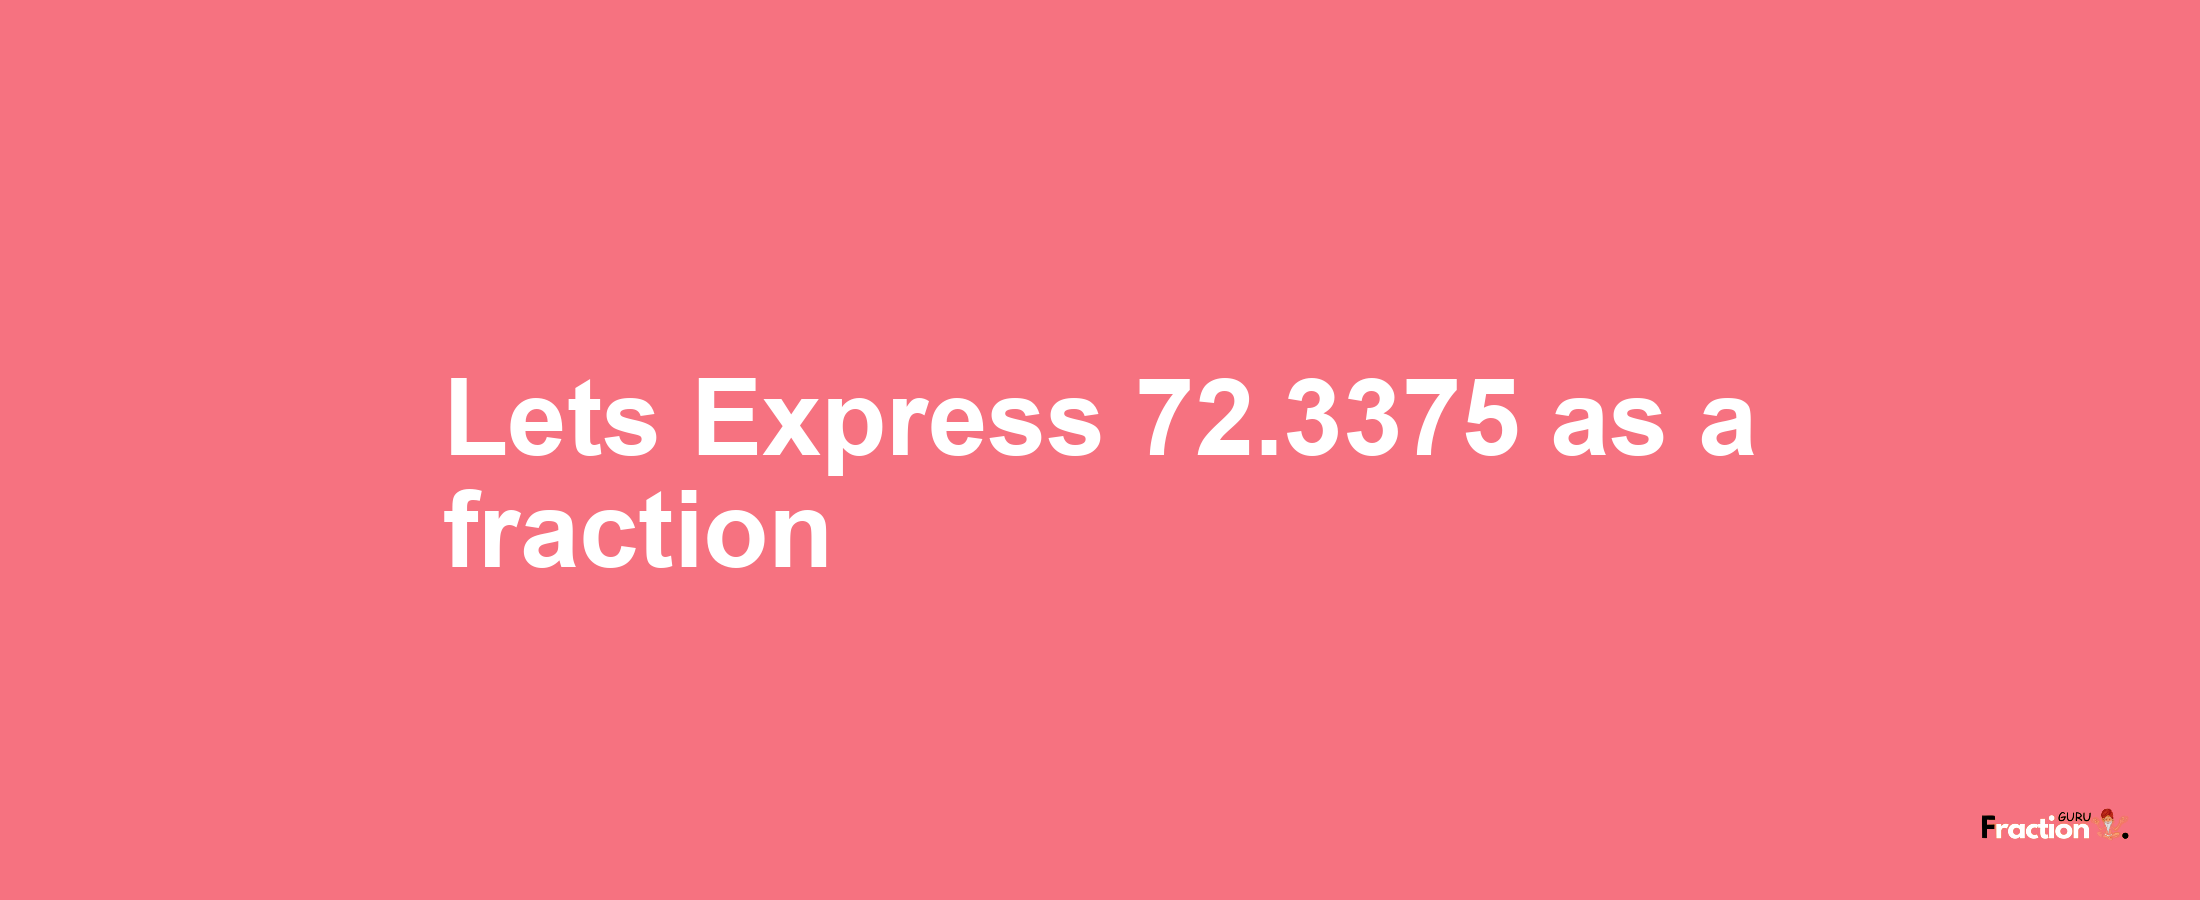 Lets Express 72.3375 as afraction